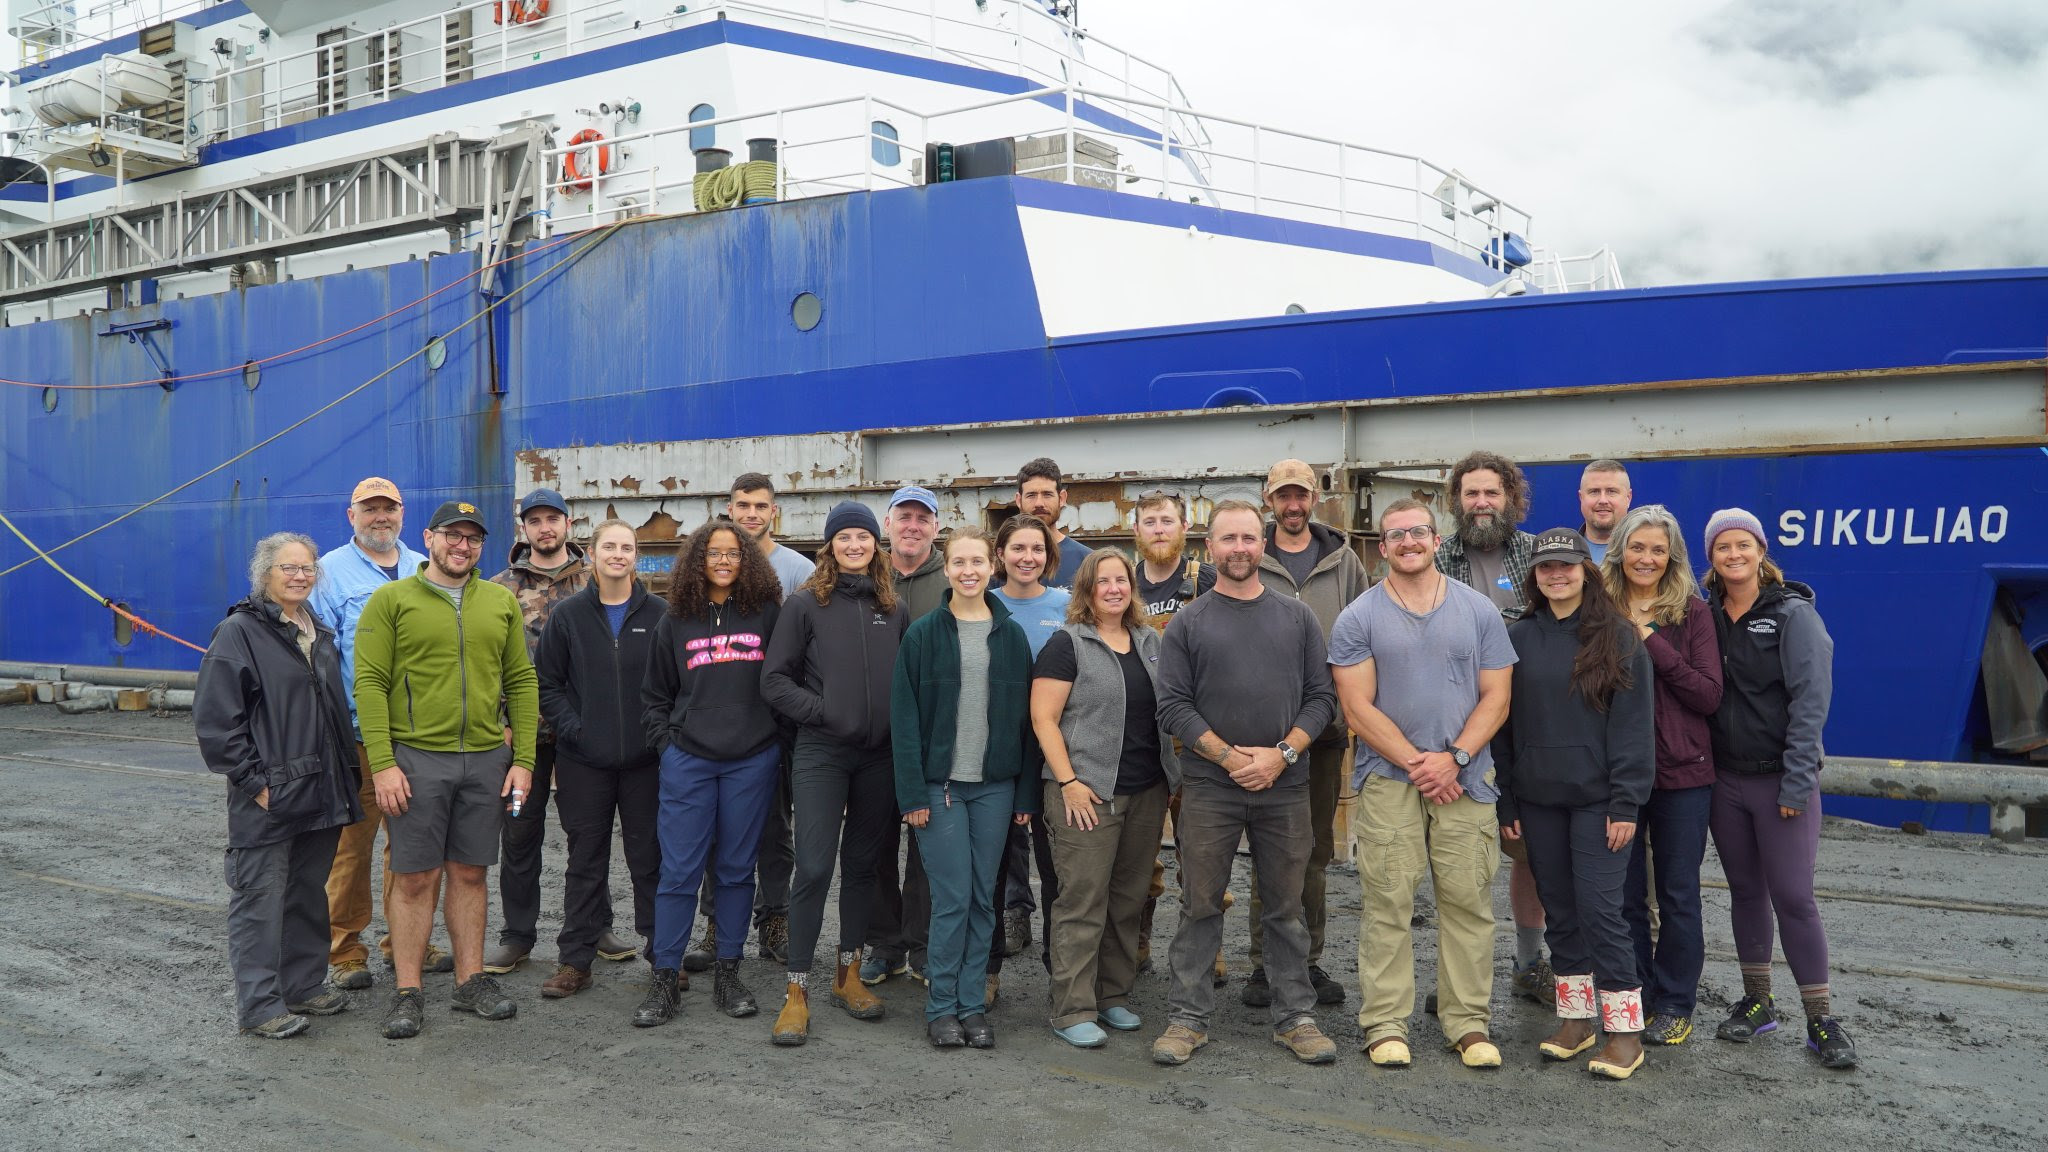 RV Sikuliaq with crew standing in front